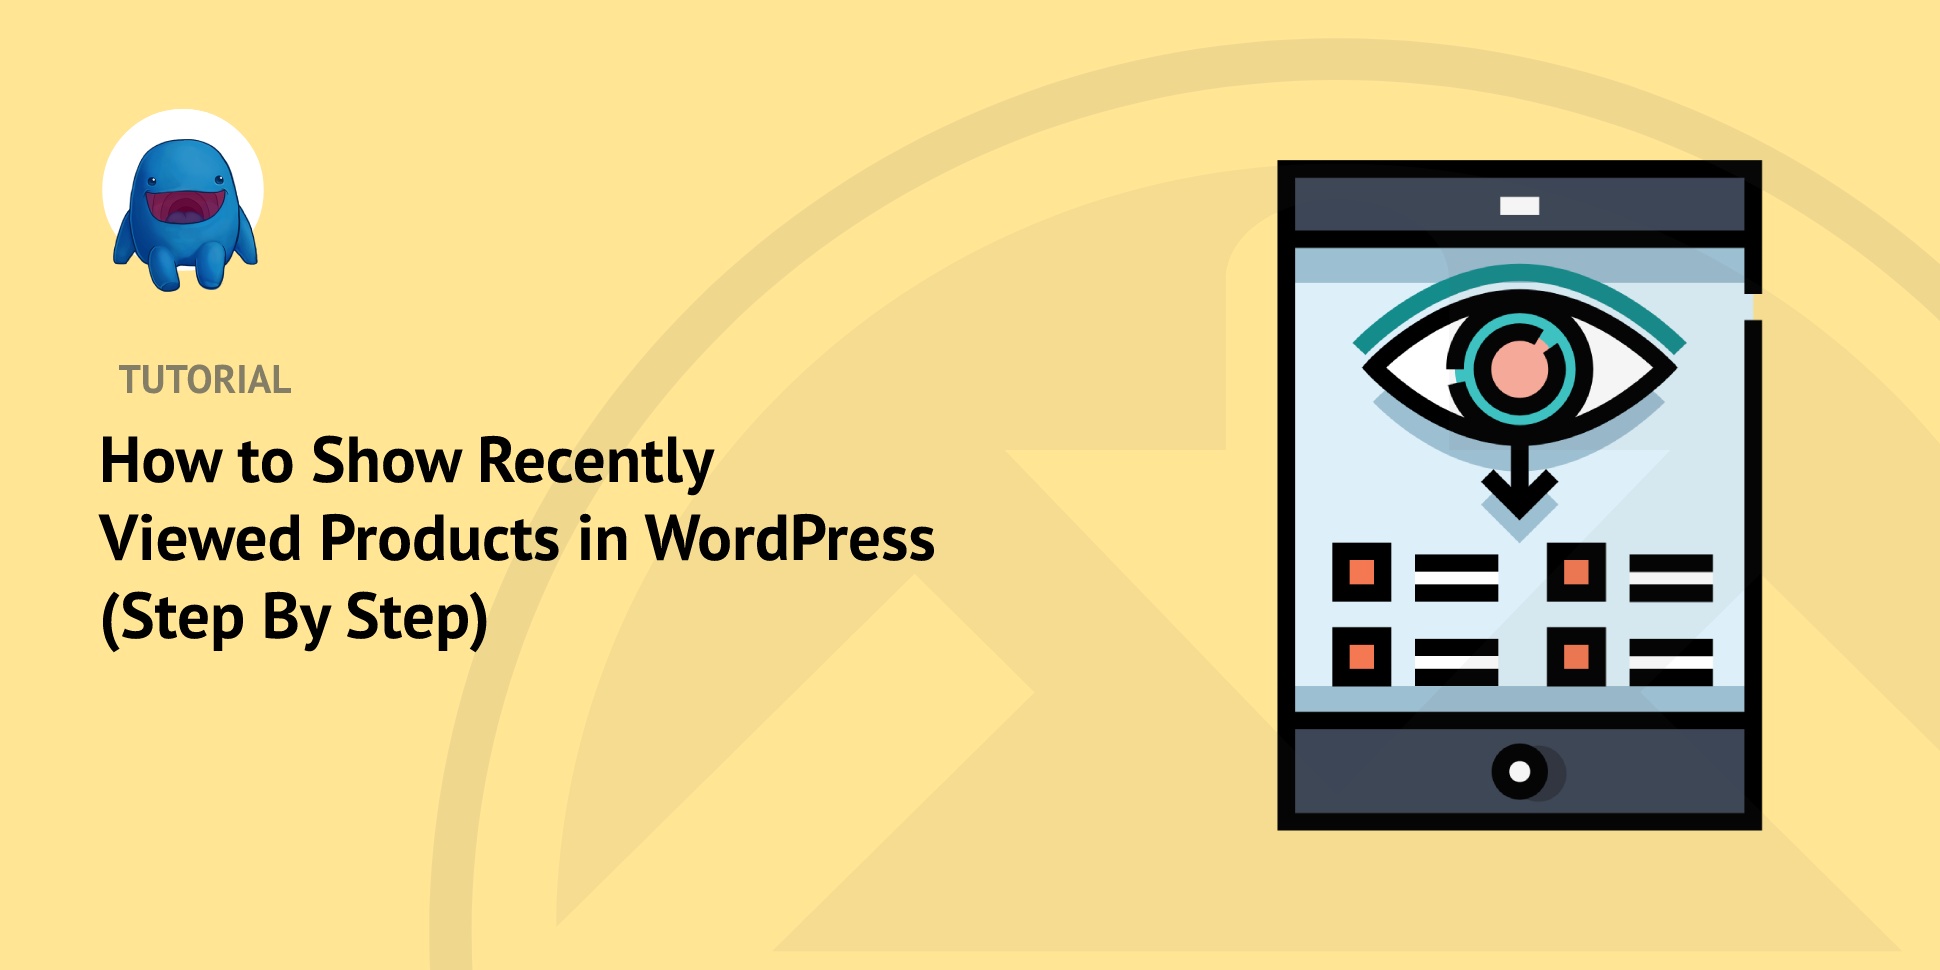 How to Show Recently Viewed Products in WordPress (Step by Step)